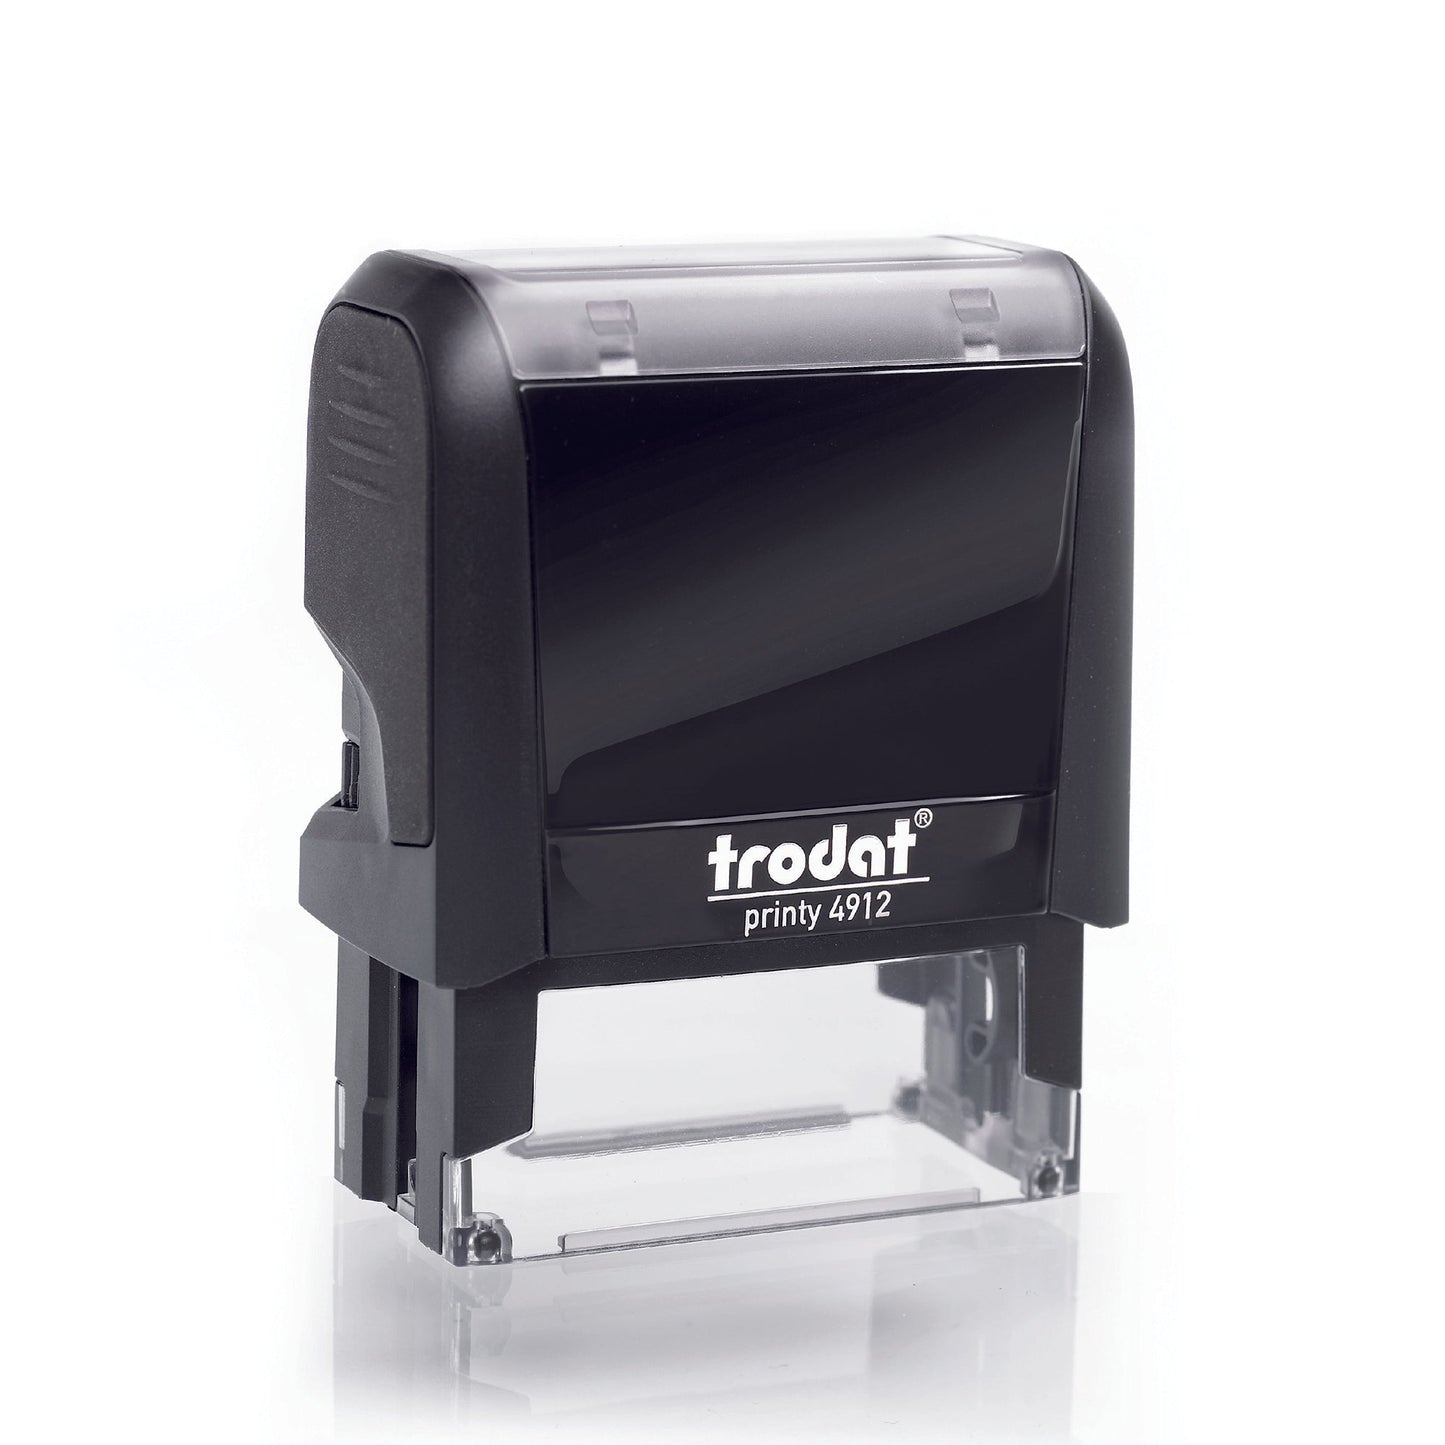 Paid By Direct Debit - Rubber Stamp - Trodat 4912 - 45mm x 14mm Impression